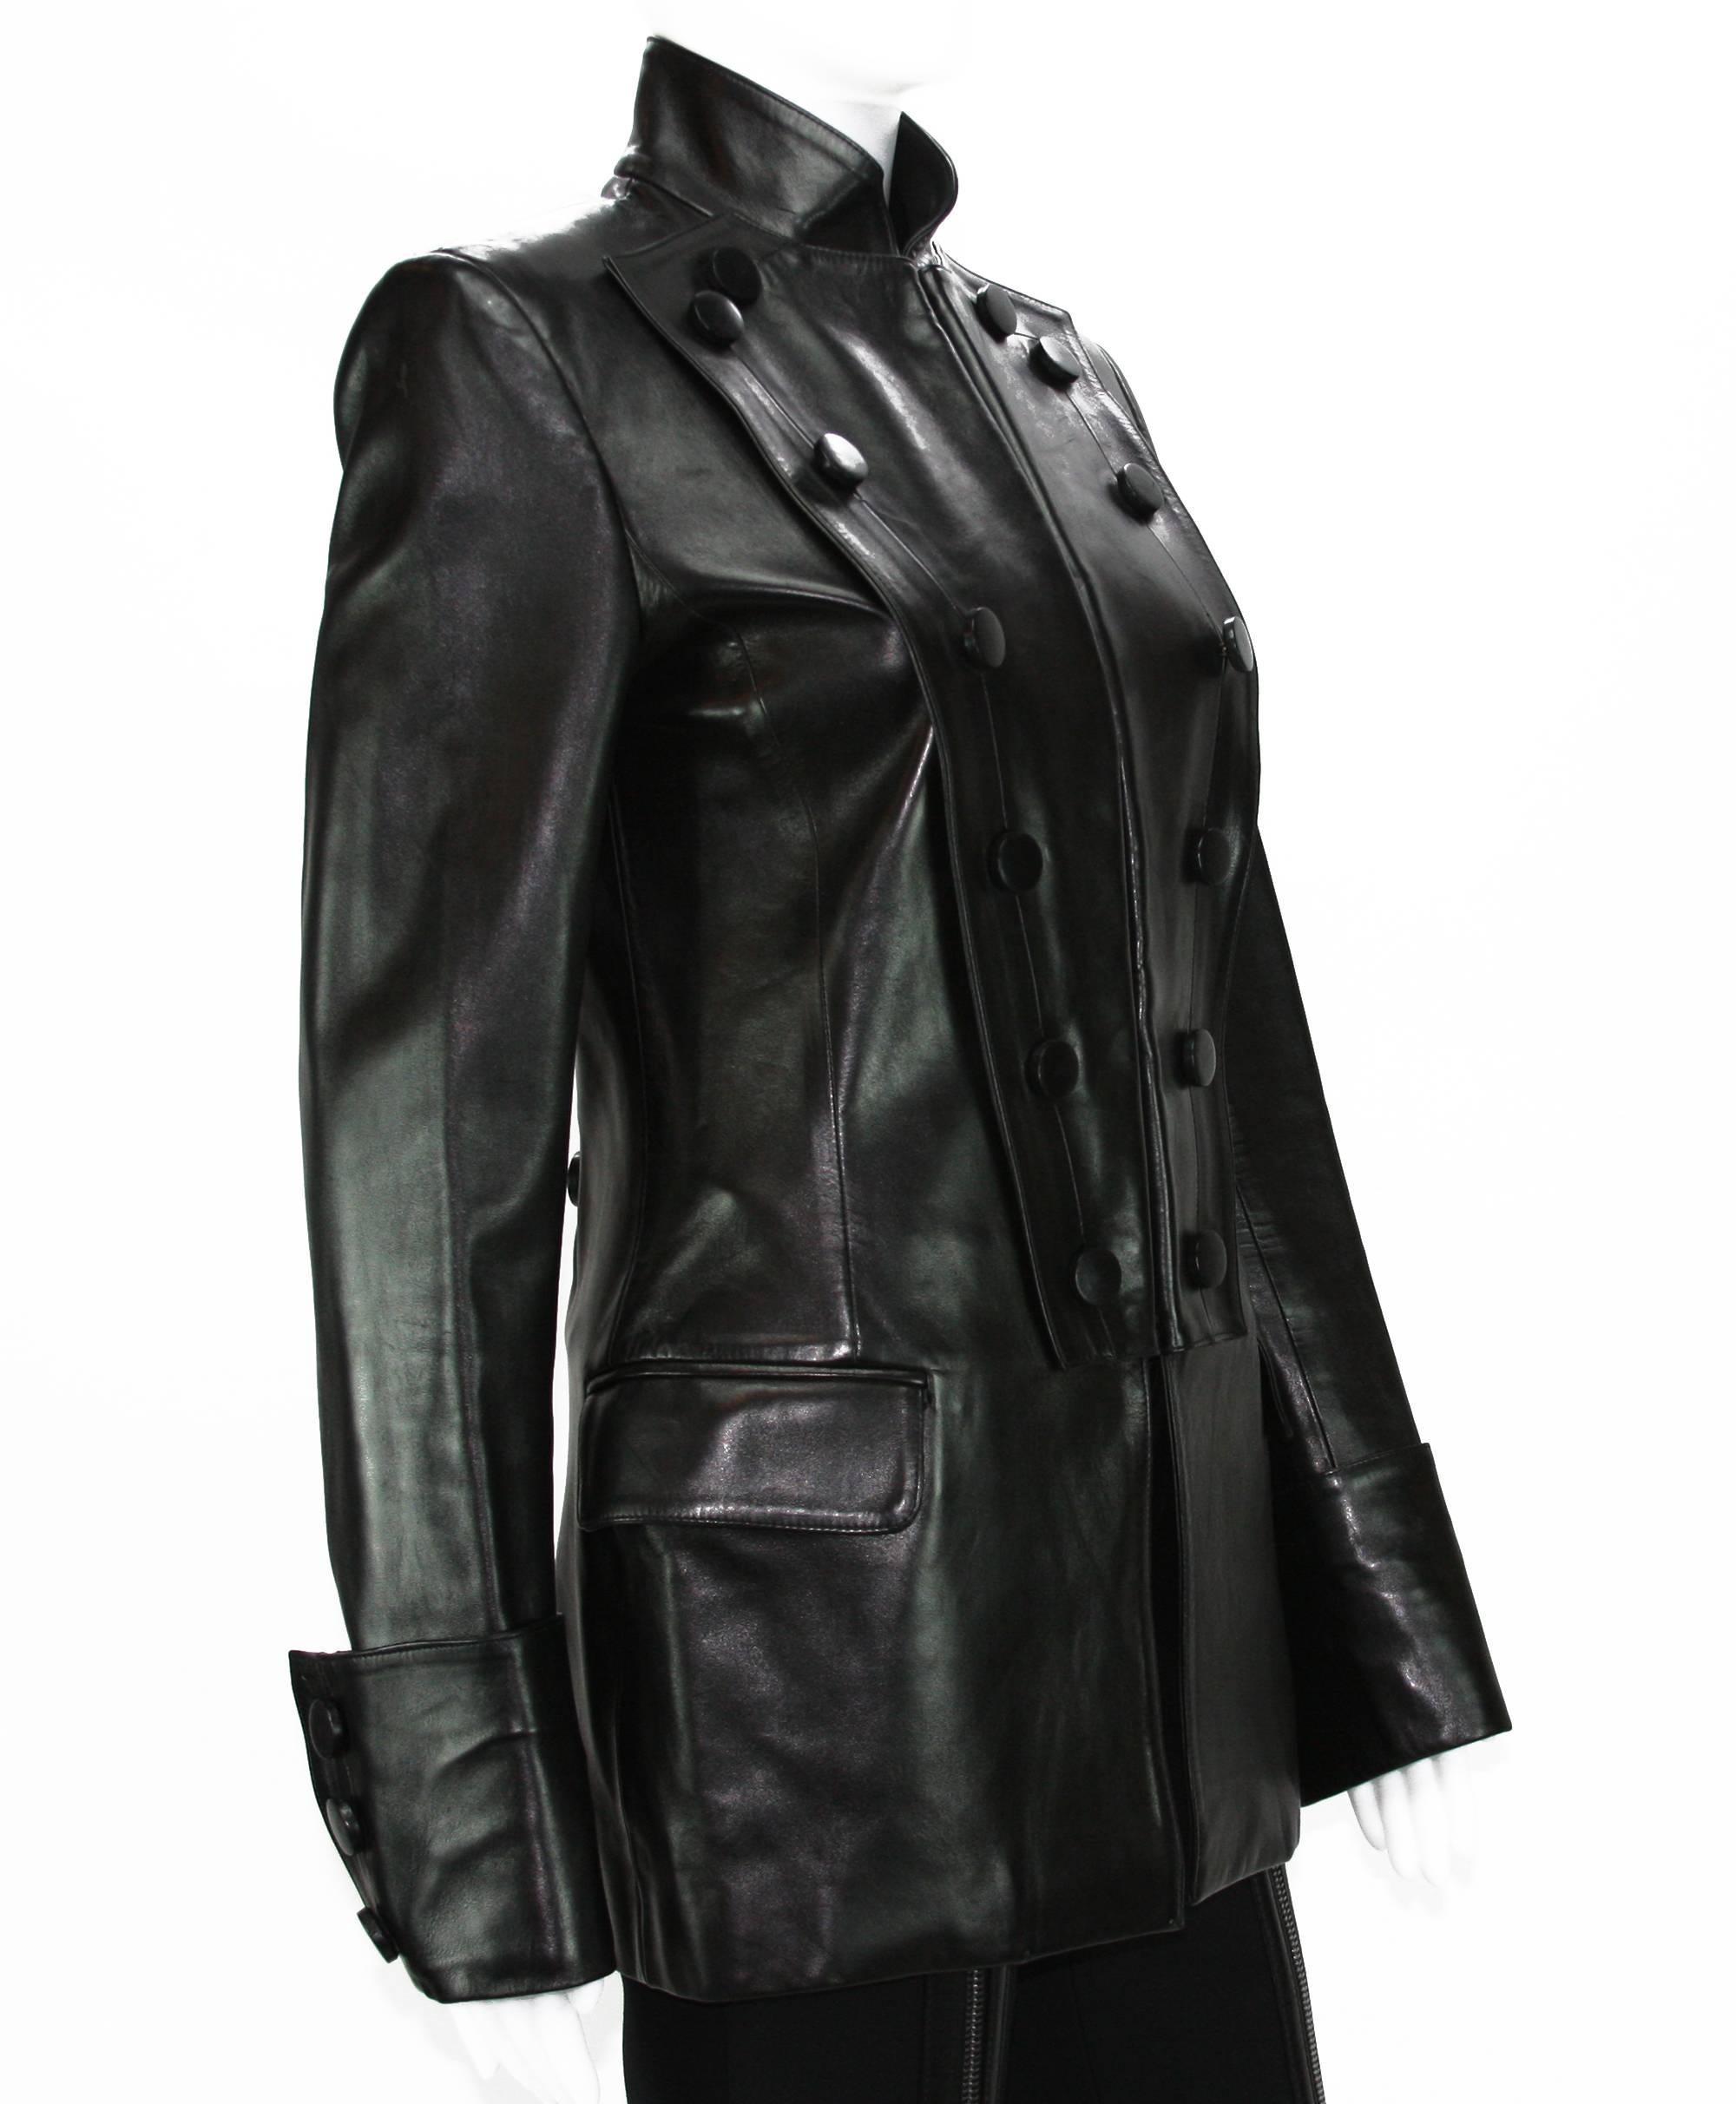 Tom Ford for Yves Saint Laurent

F/W 2001 Collection

Black Leather Military style jacket

Fr. size 38

Measurements flat: Length - 28.5 inches, Shoulder - 17